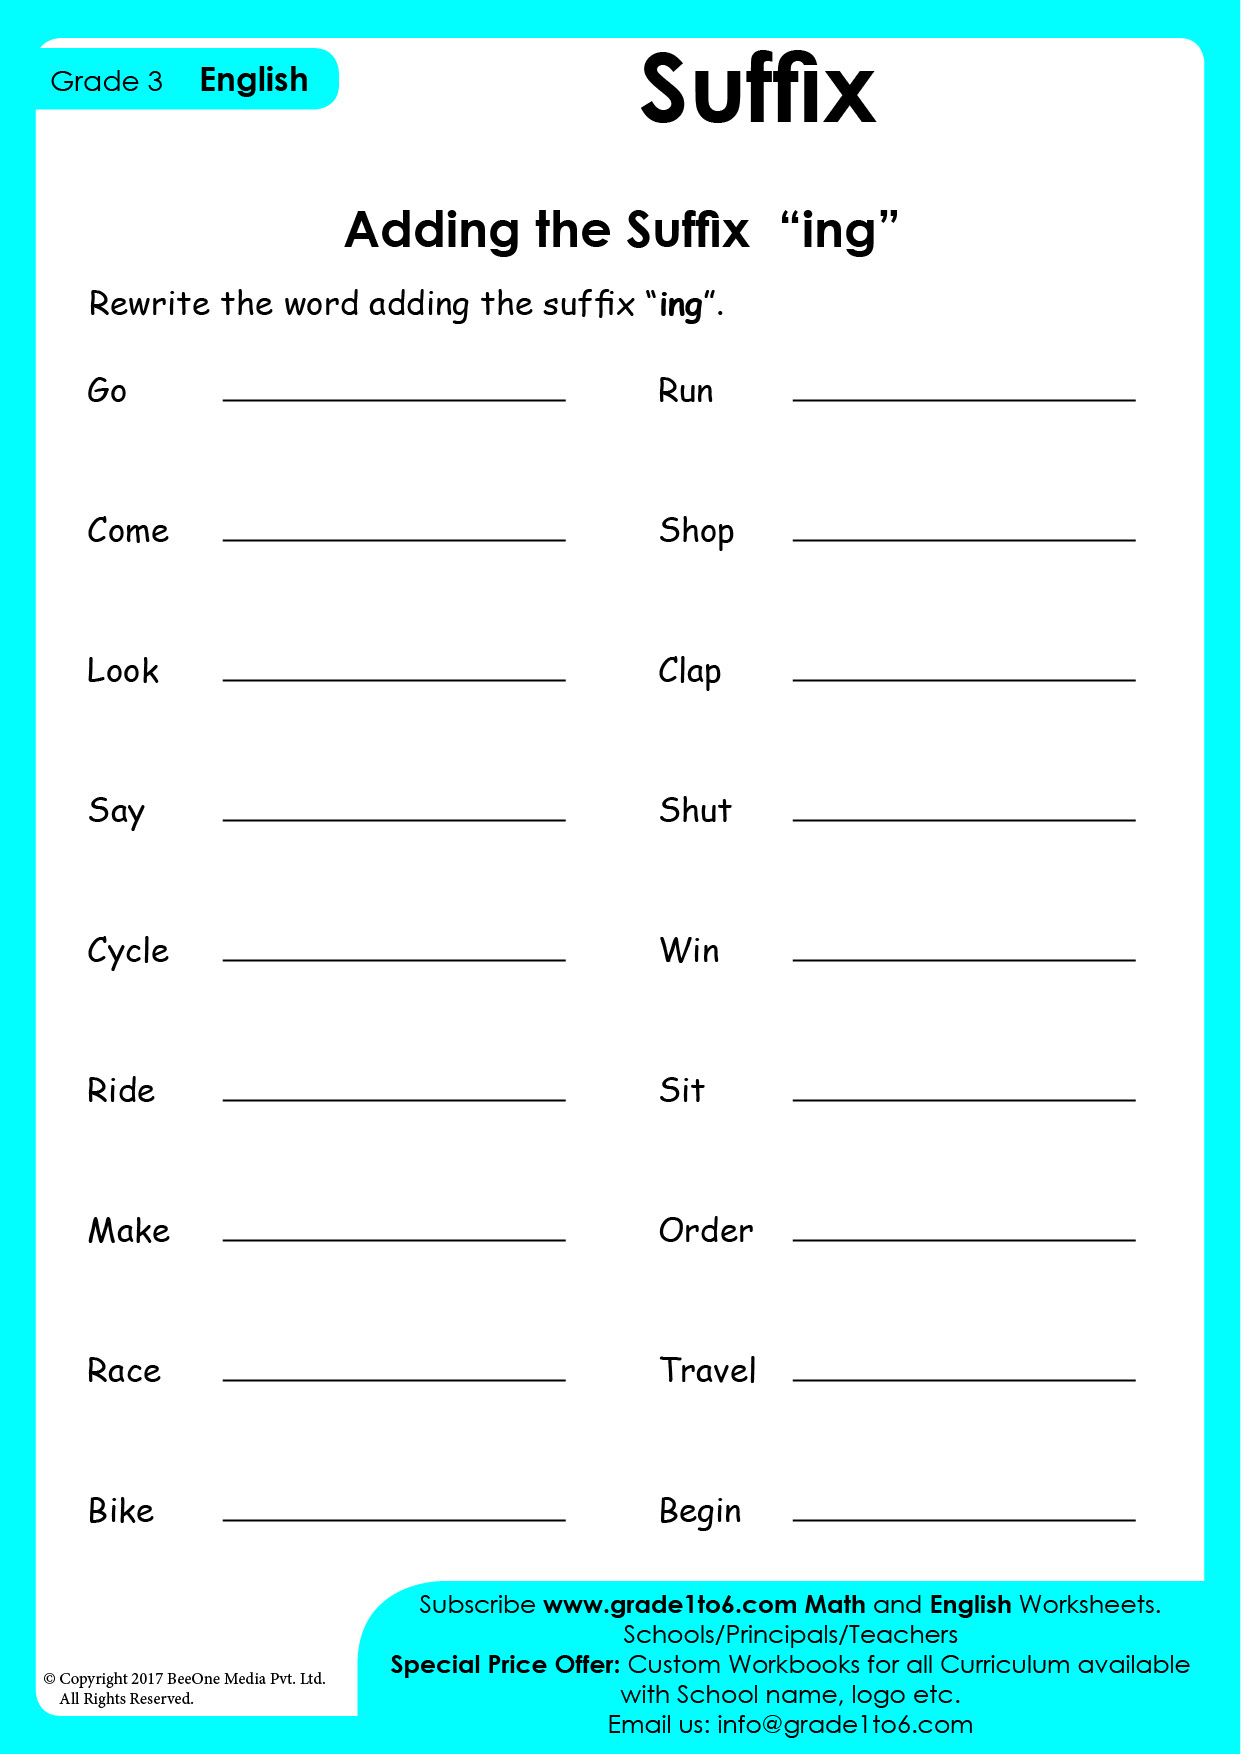 suffix-worksheets-grade-3-grade1to6